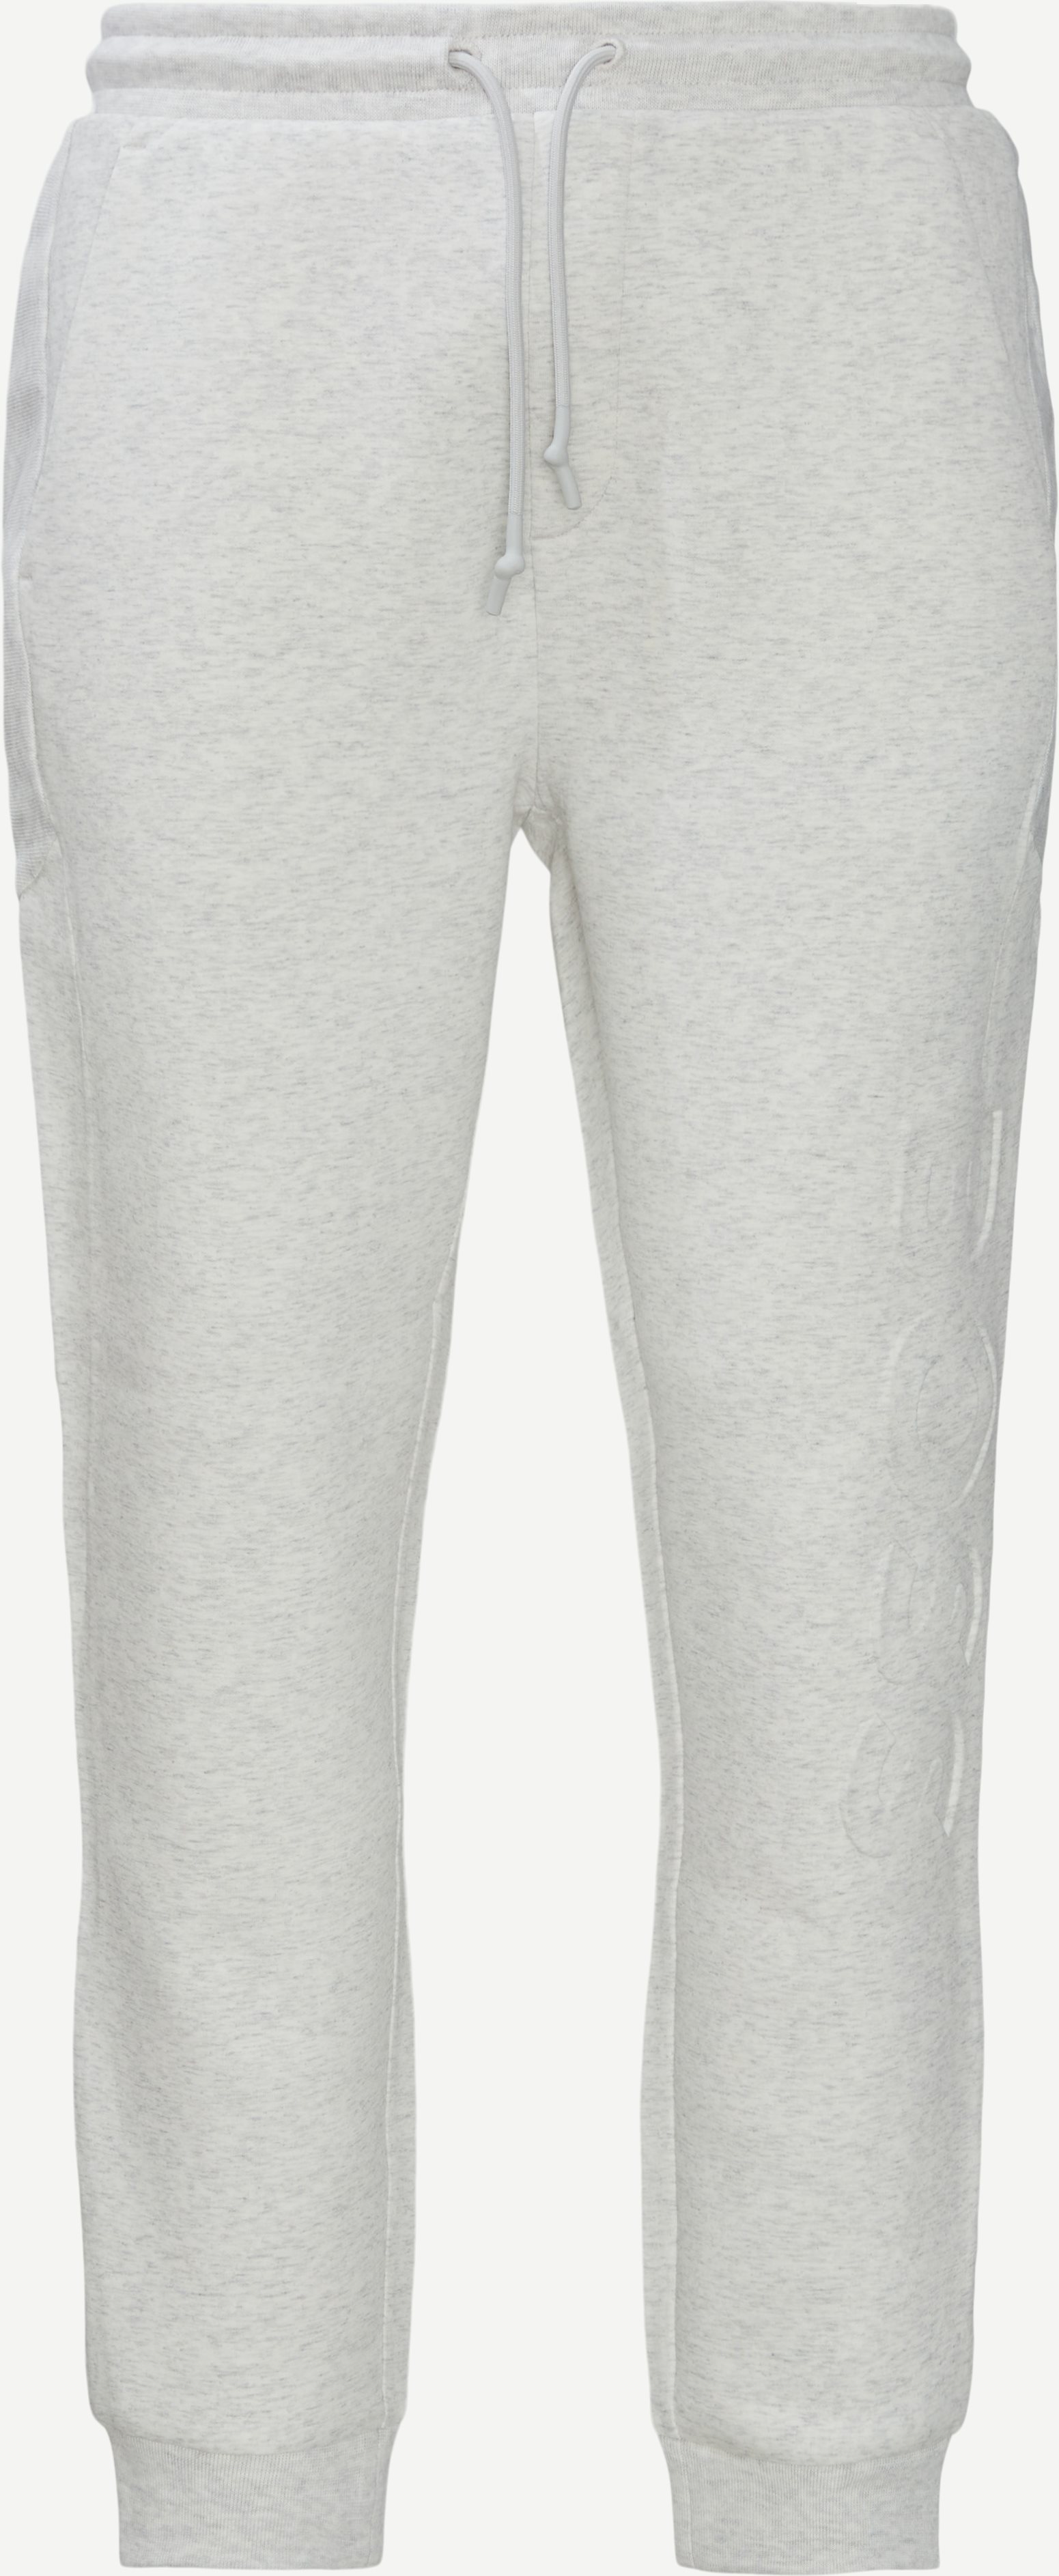 BOSS Athleisure Trousers 50471761 HOVER Grey